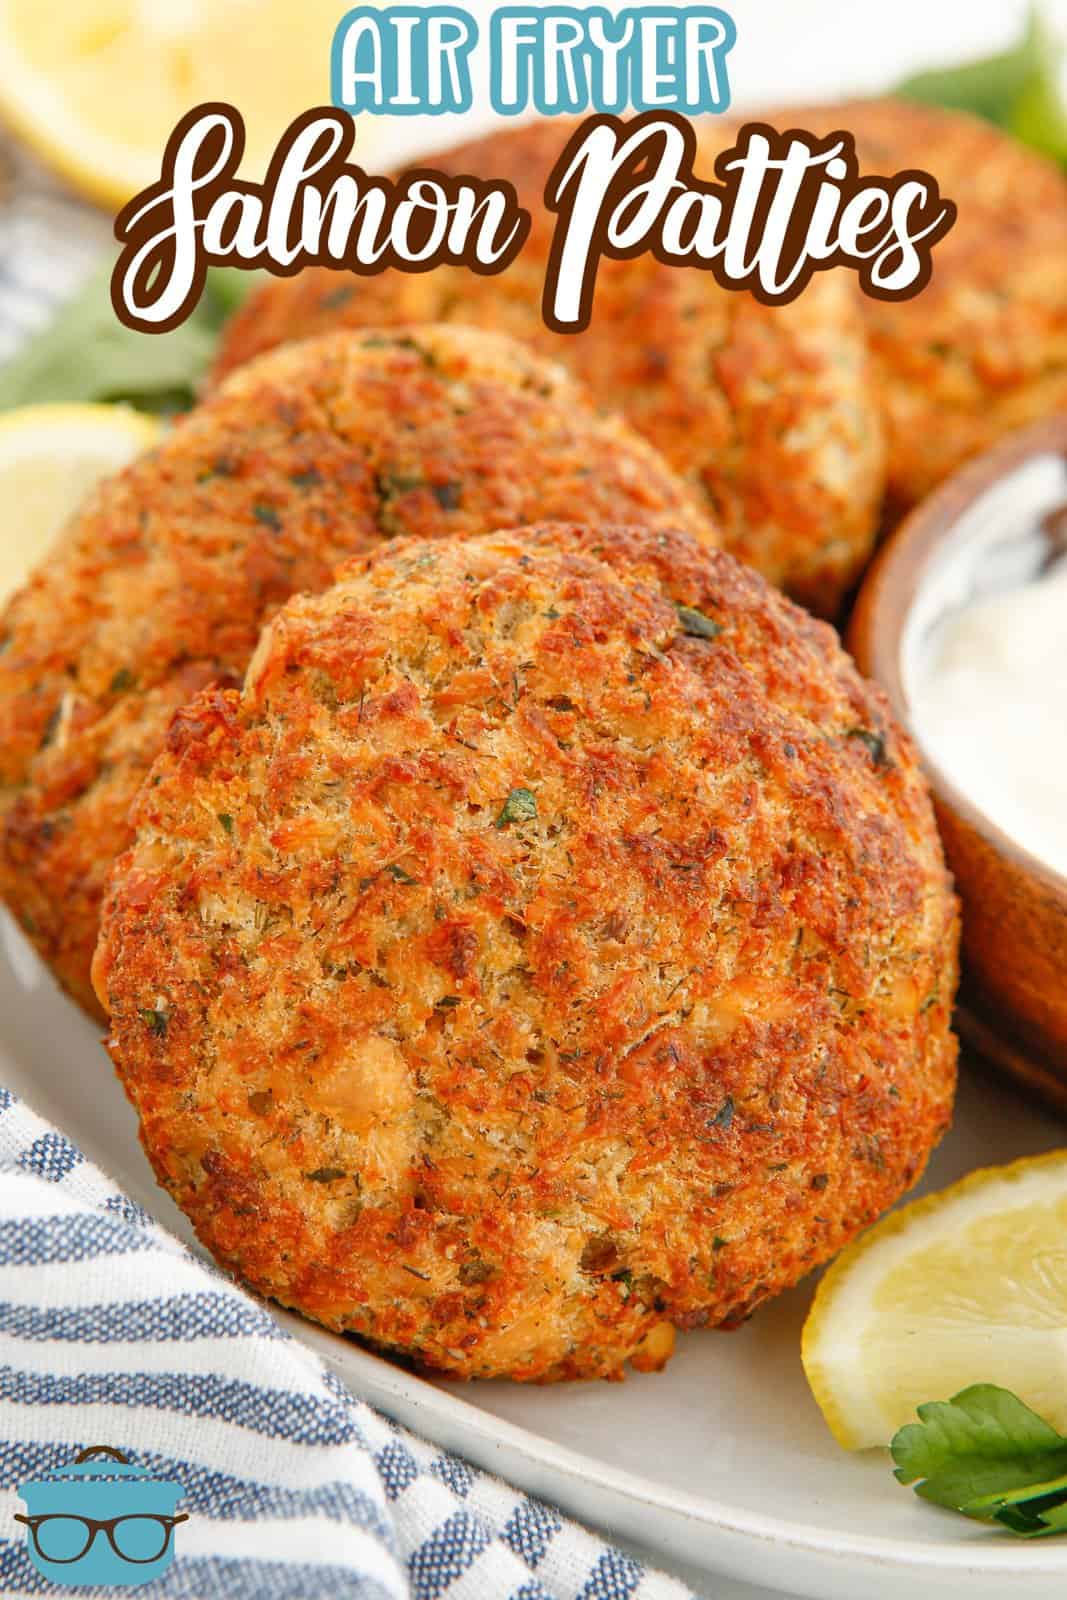 Layered Air Fryer Salmon Patties on plate with lemon and dipping sauce Pinterest image.